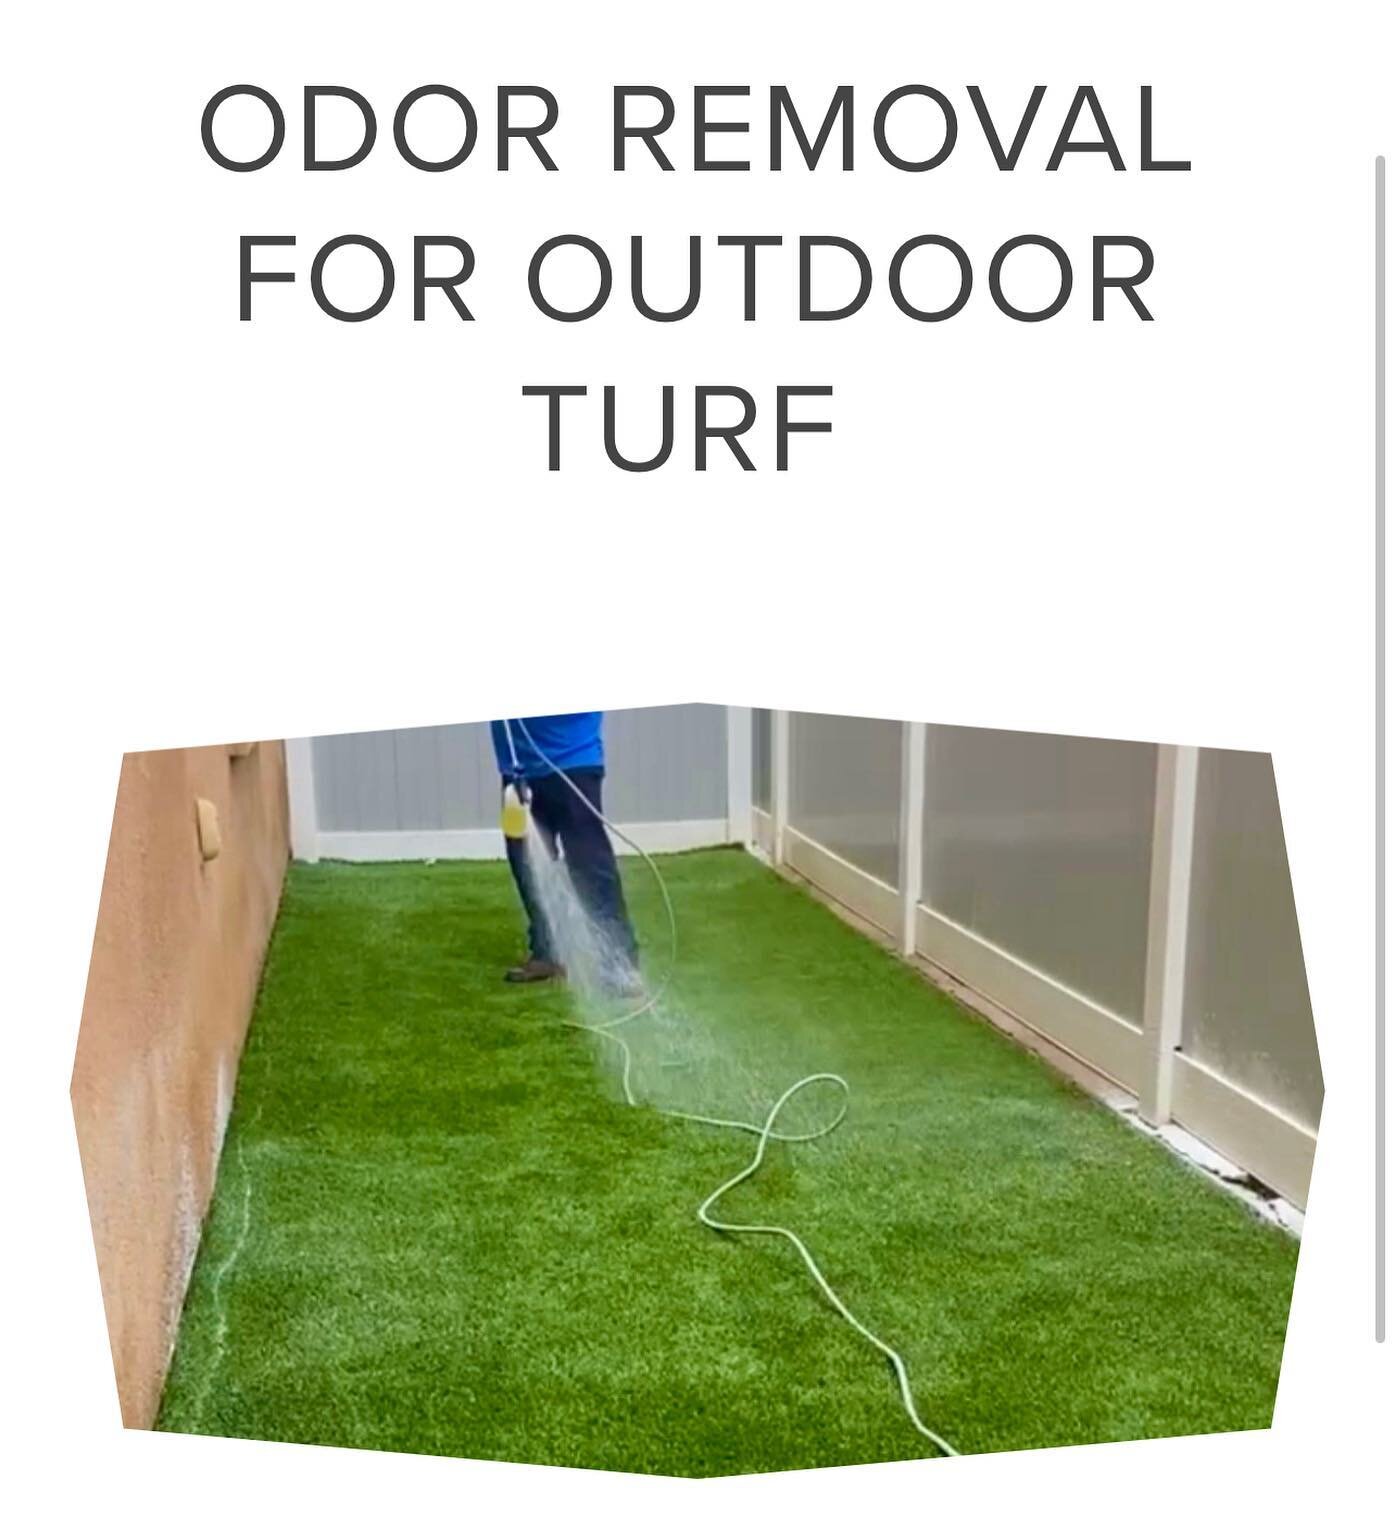 Summer entertaining is just around the corner. Could it be time to spruce up that TURF in the yard? Try Black Knight&rsquo;s cleaning and deodorizing turf service. 
It&rsquo;s odor removal for your artificial turf! 

#PestTips #PestControl #turf #Gra